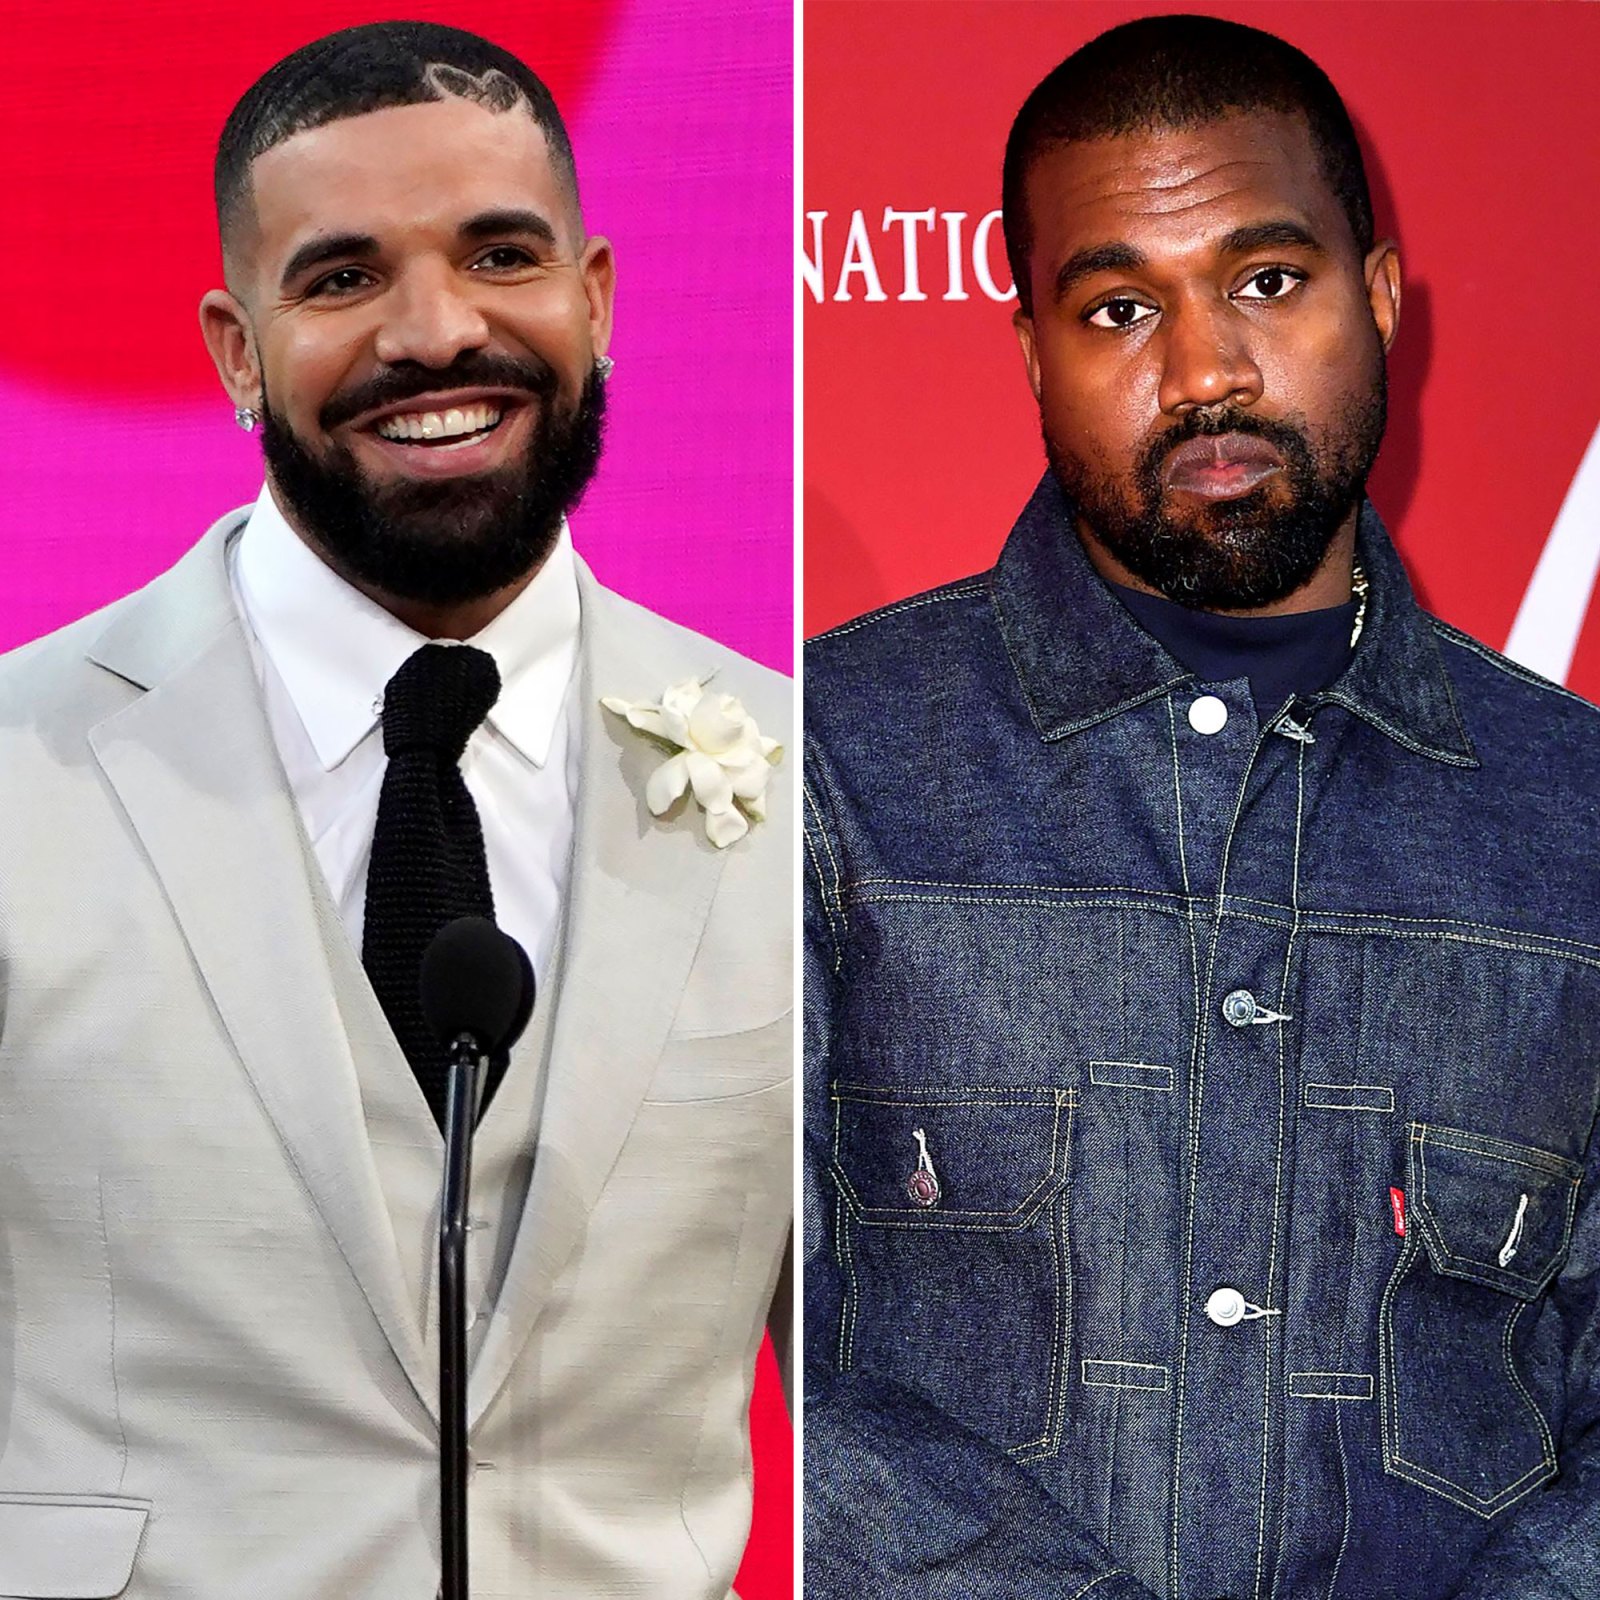 Drake Seemingly Throws Shade at Kanye West on ‘Certified Lover Boy’ Track